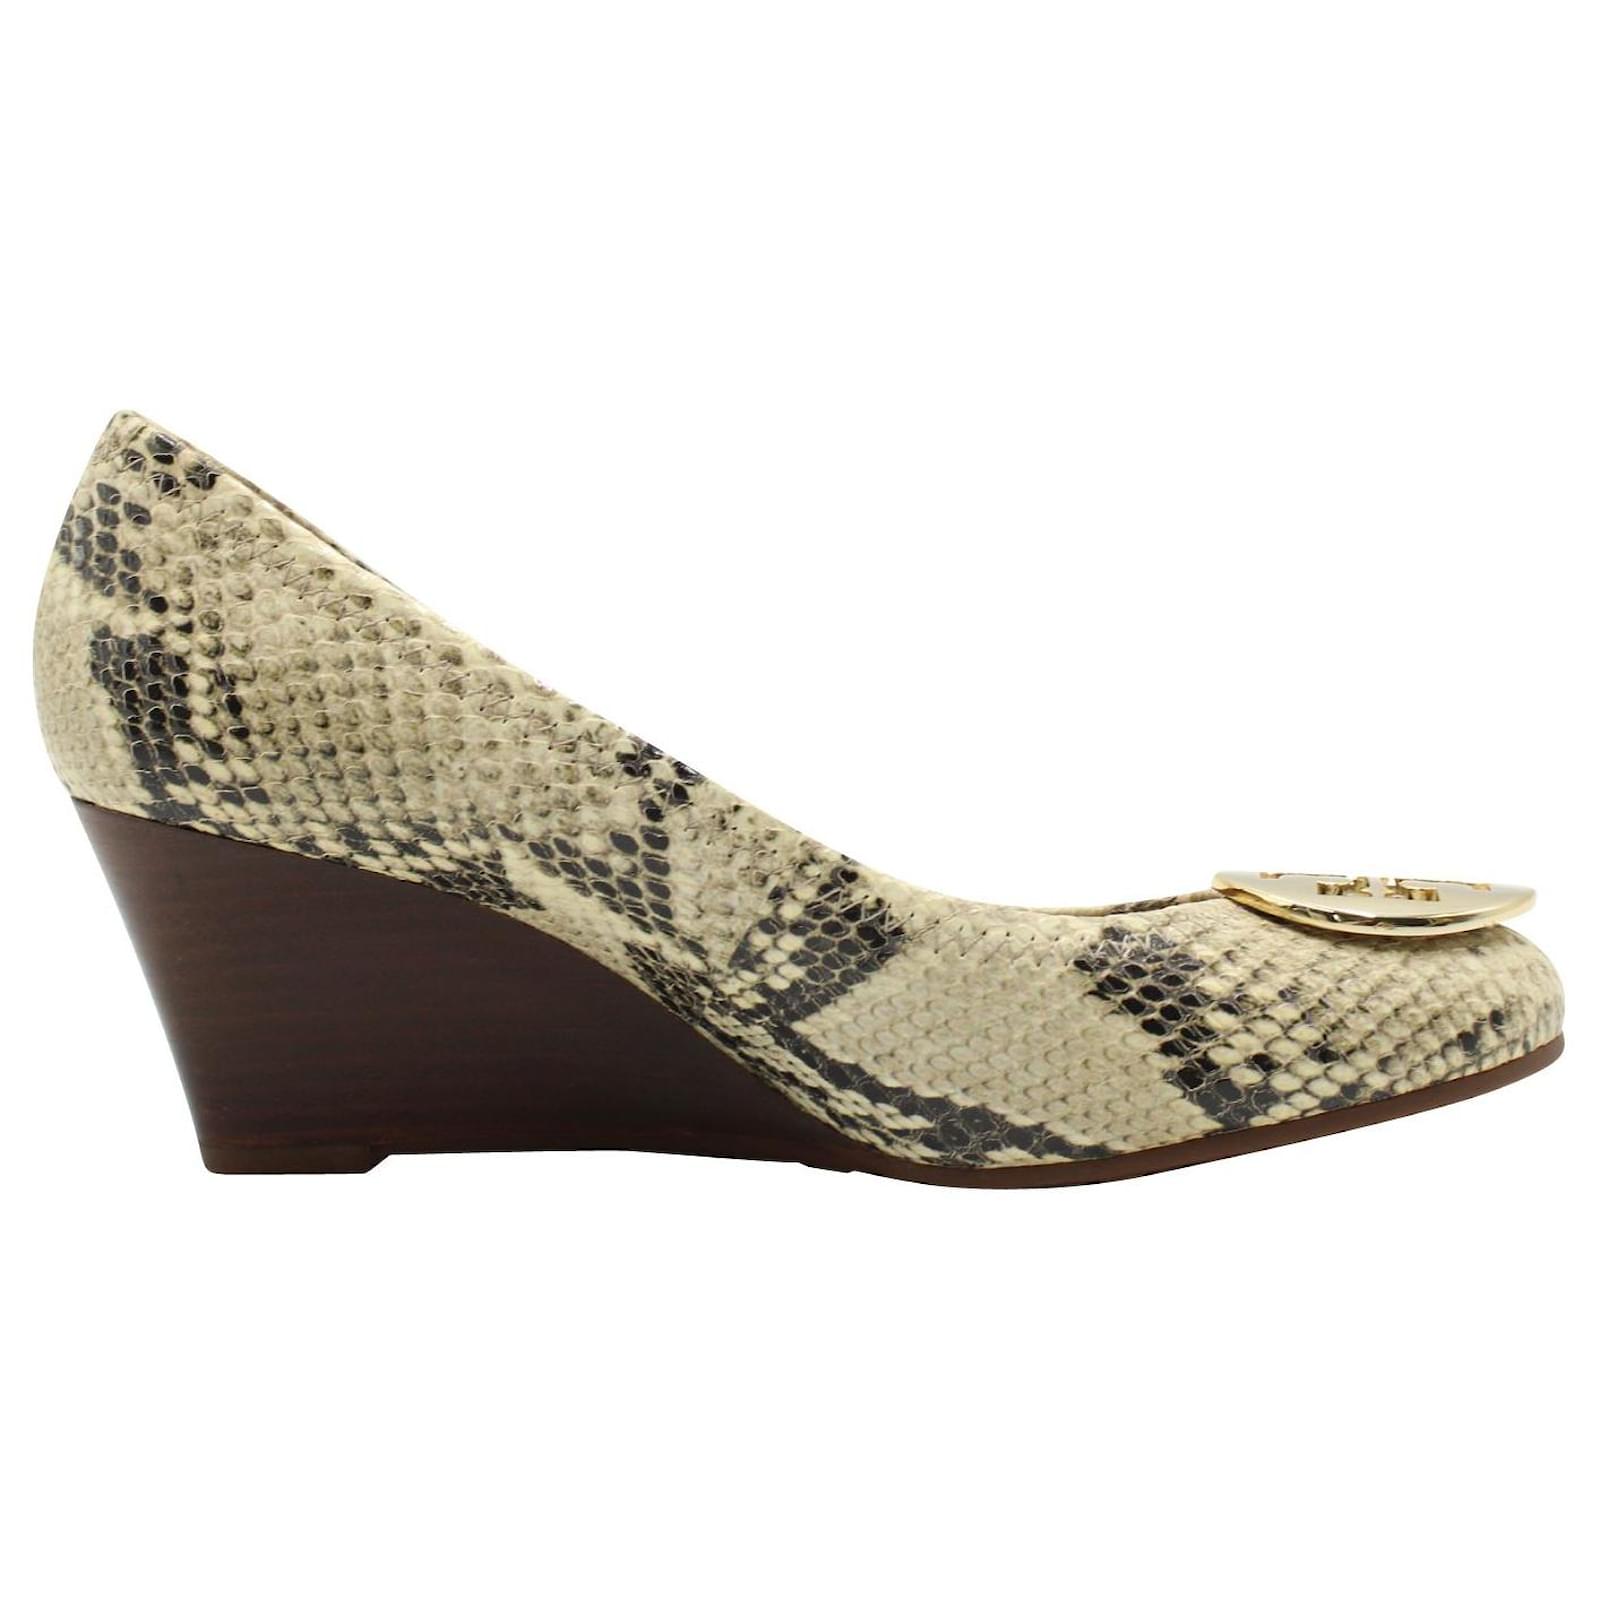 Tory Burch Snakeskin Wedges with Golden Buckle Leather  - Joli  Closet